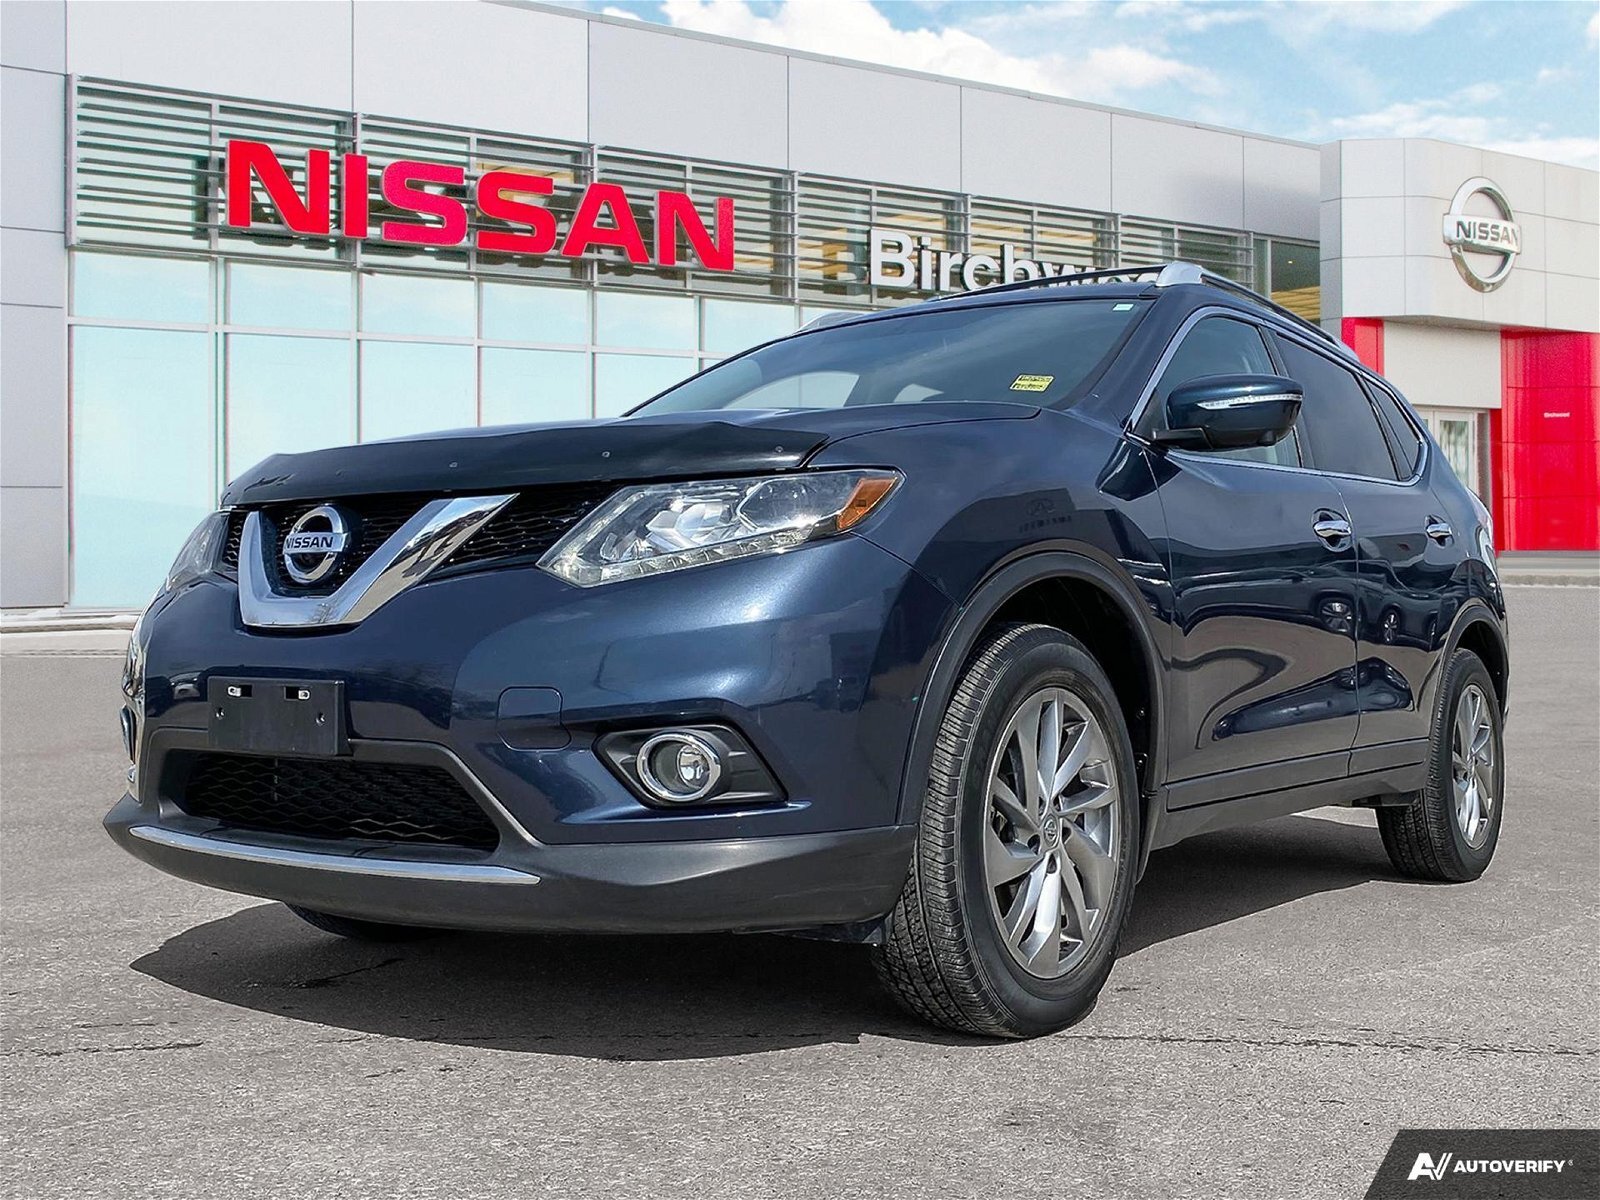 2015 Nissan Rogue SL Locally Owned | Good Condition | Low KM's